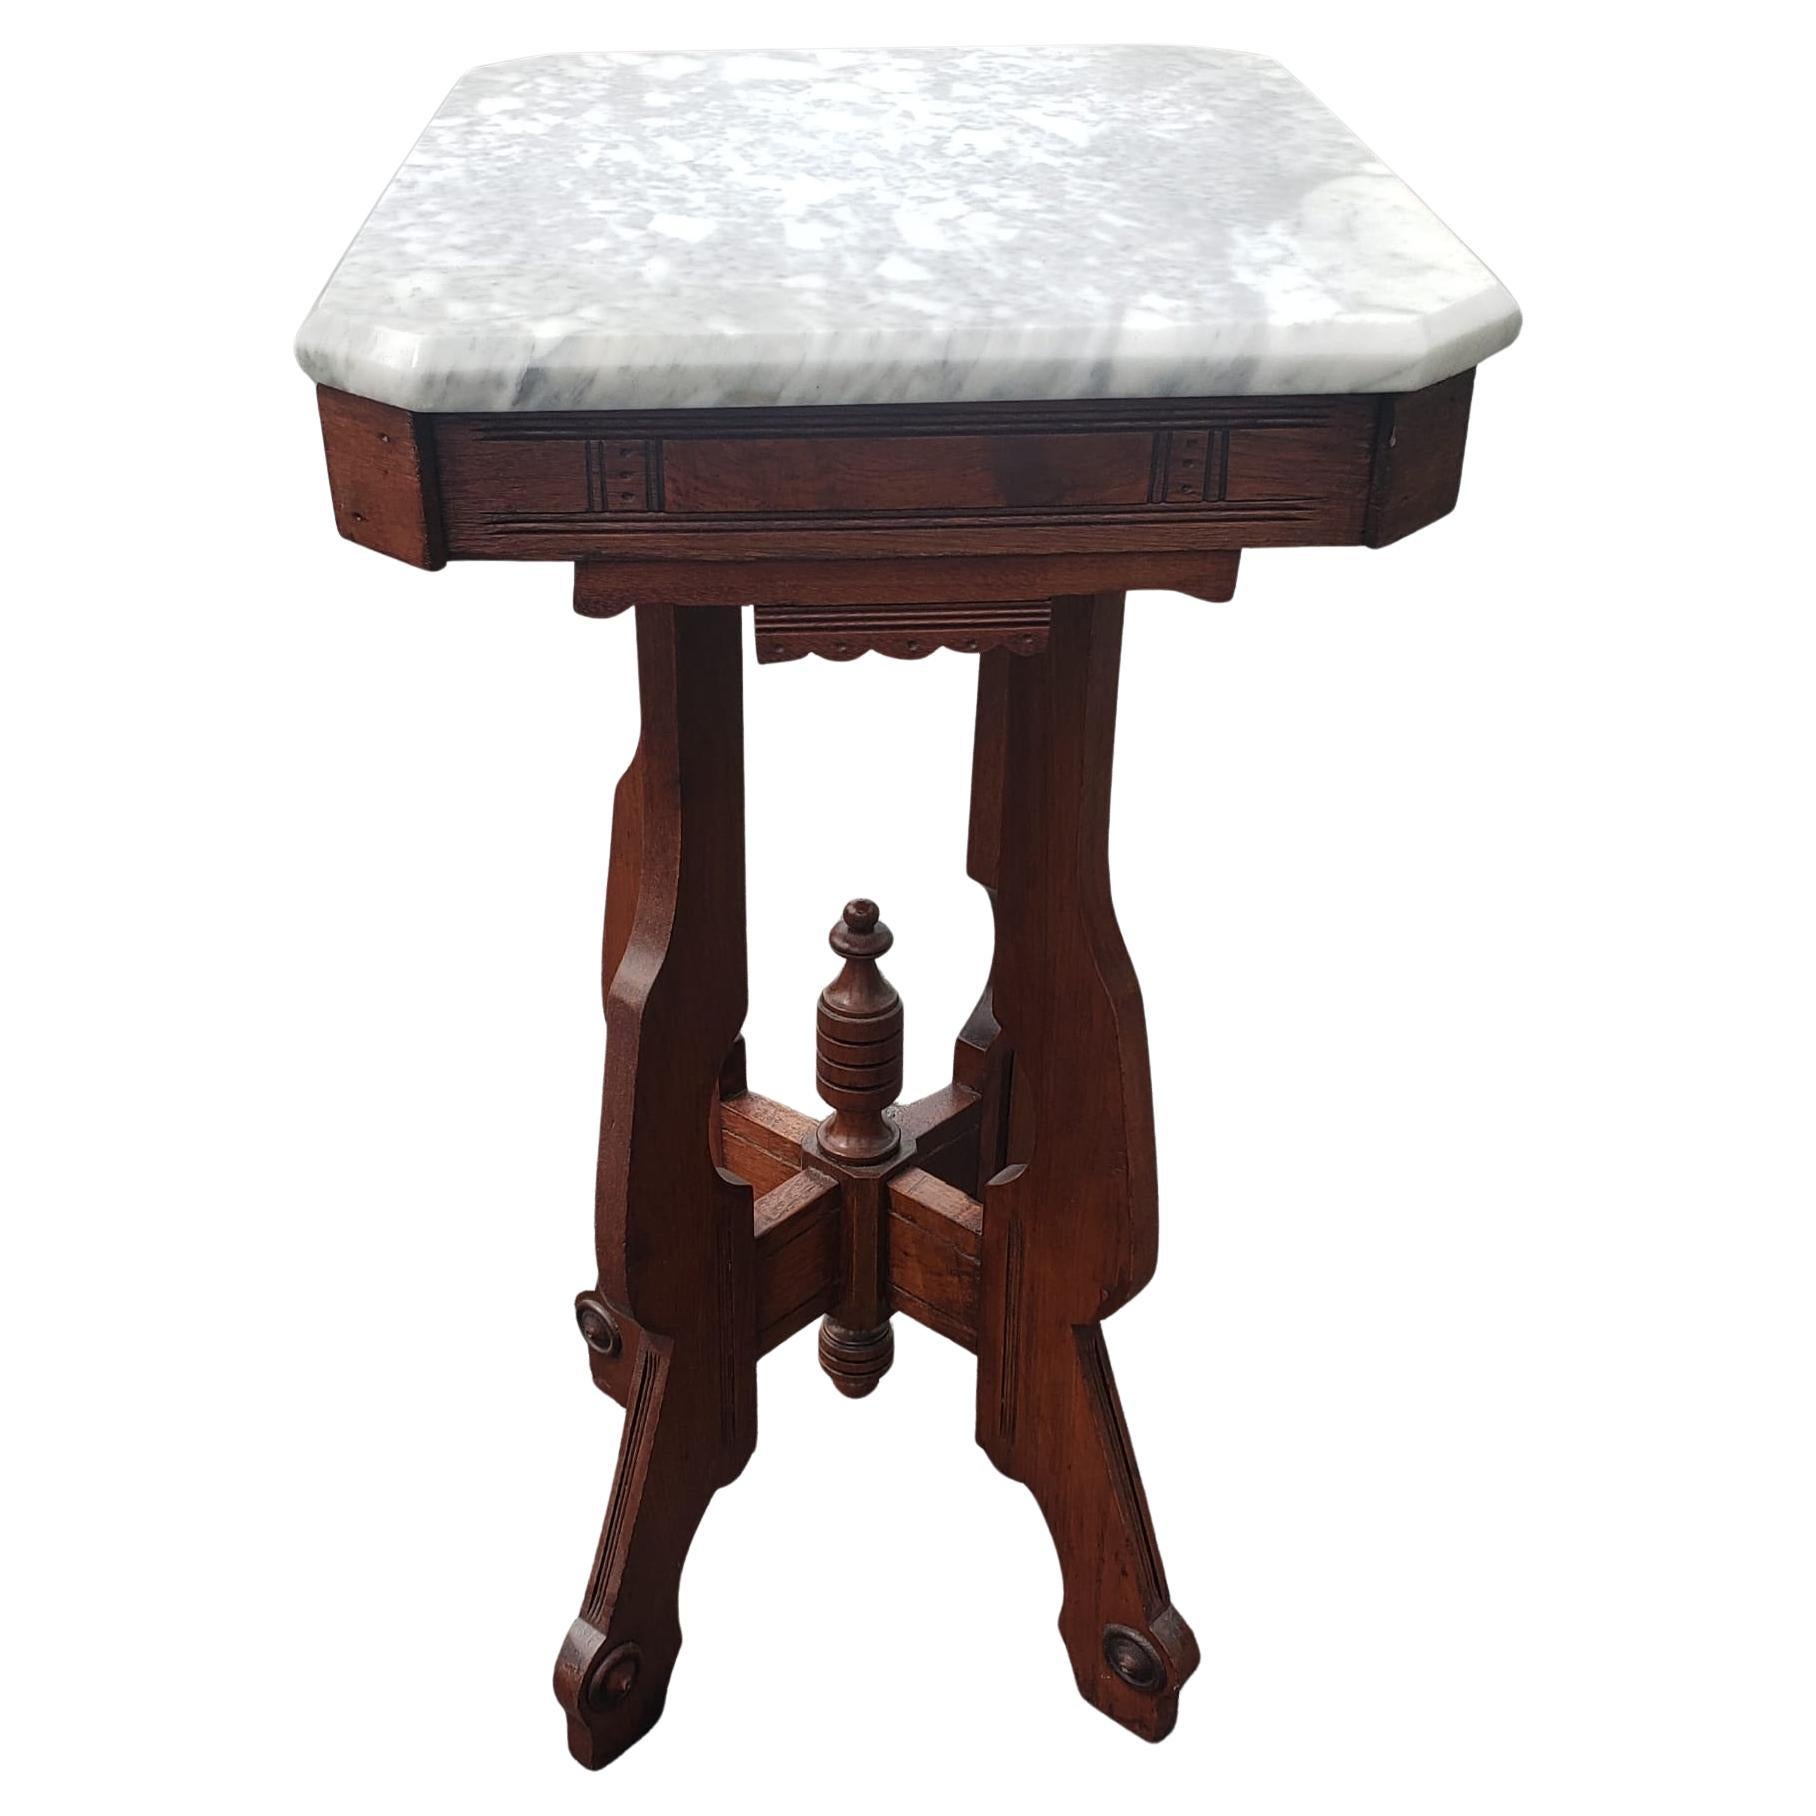 Victorian Carved Mahogany and Marble Top Candle Srand or Side Table